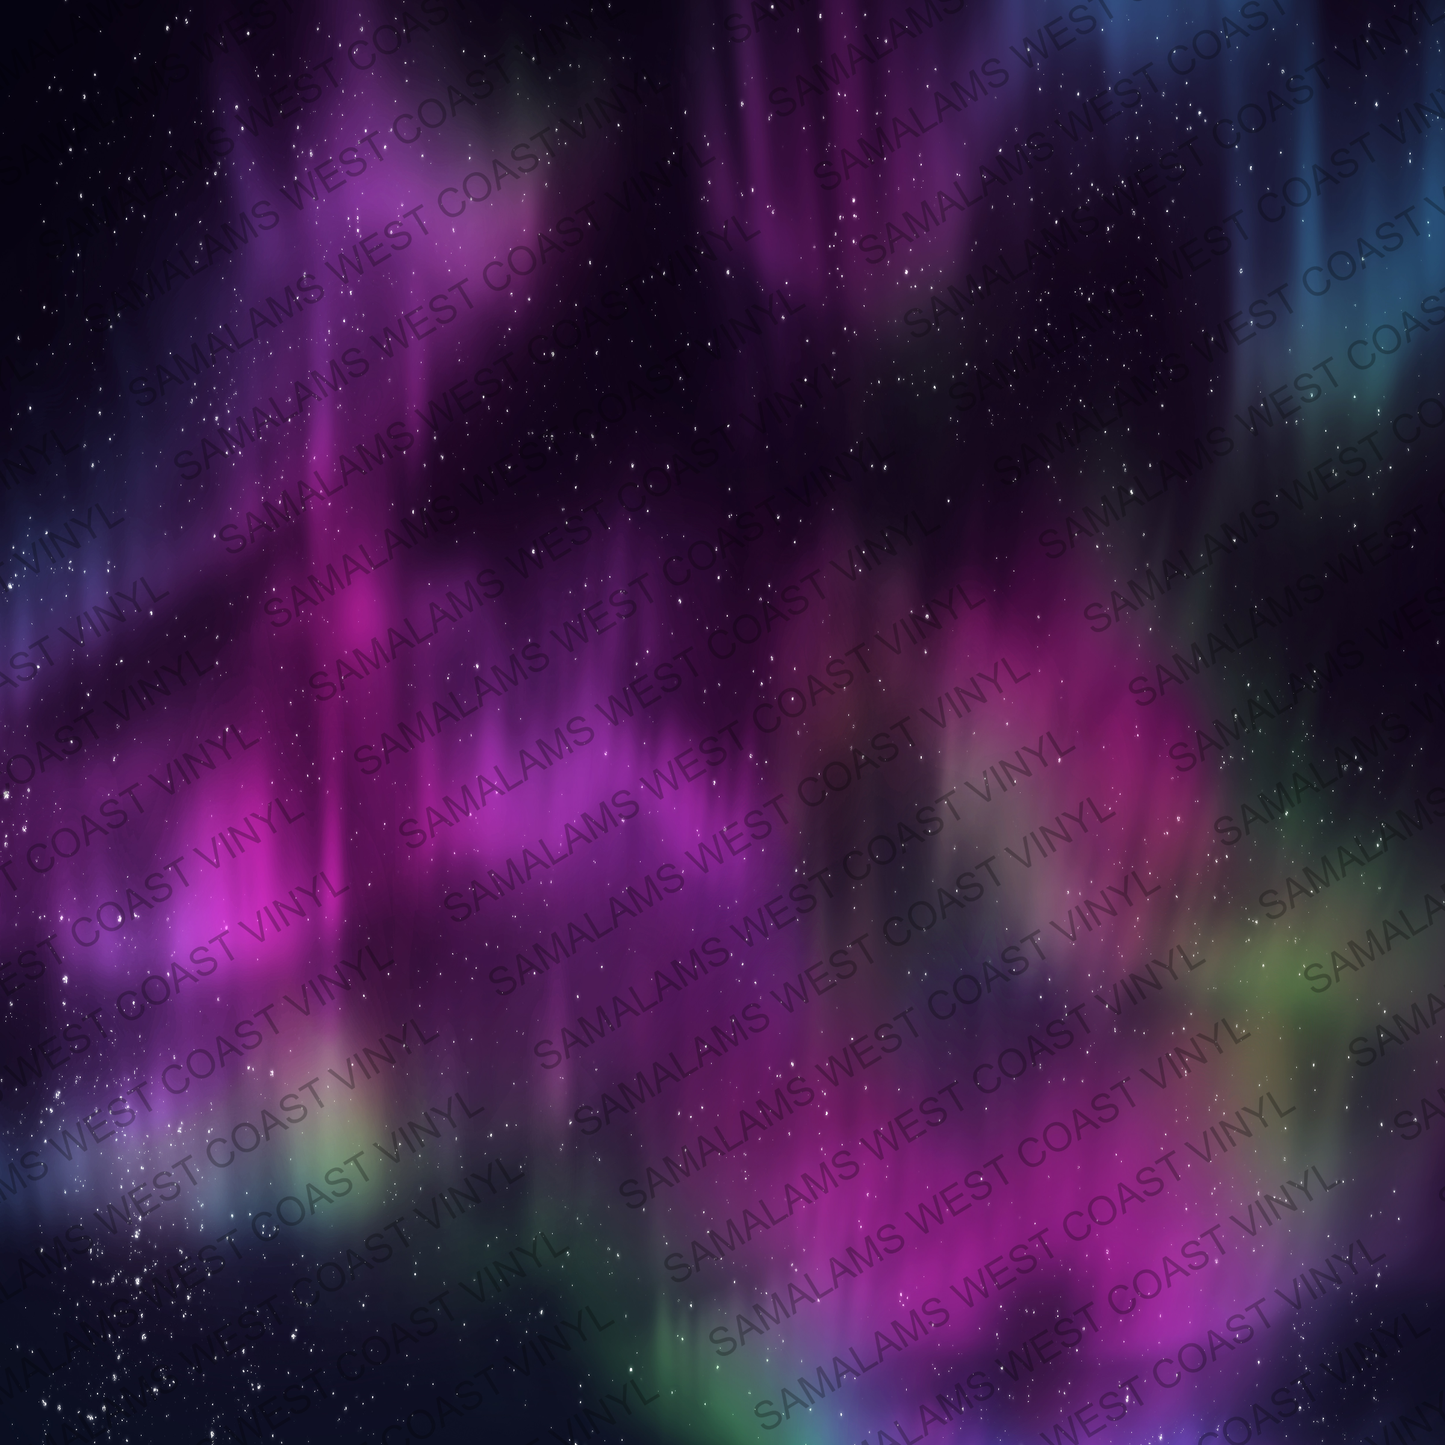 Northern Lights - Pack 2 (Not Seamless)